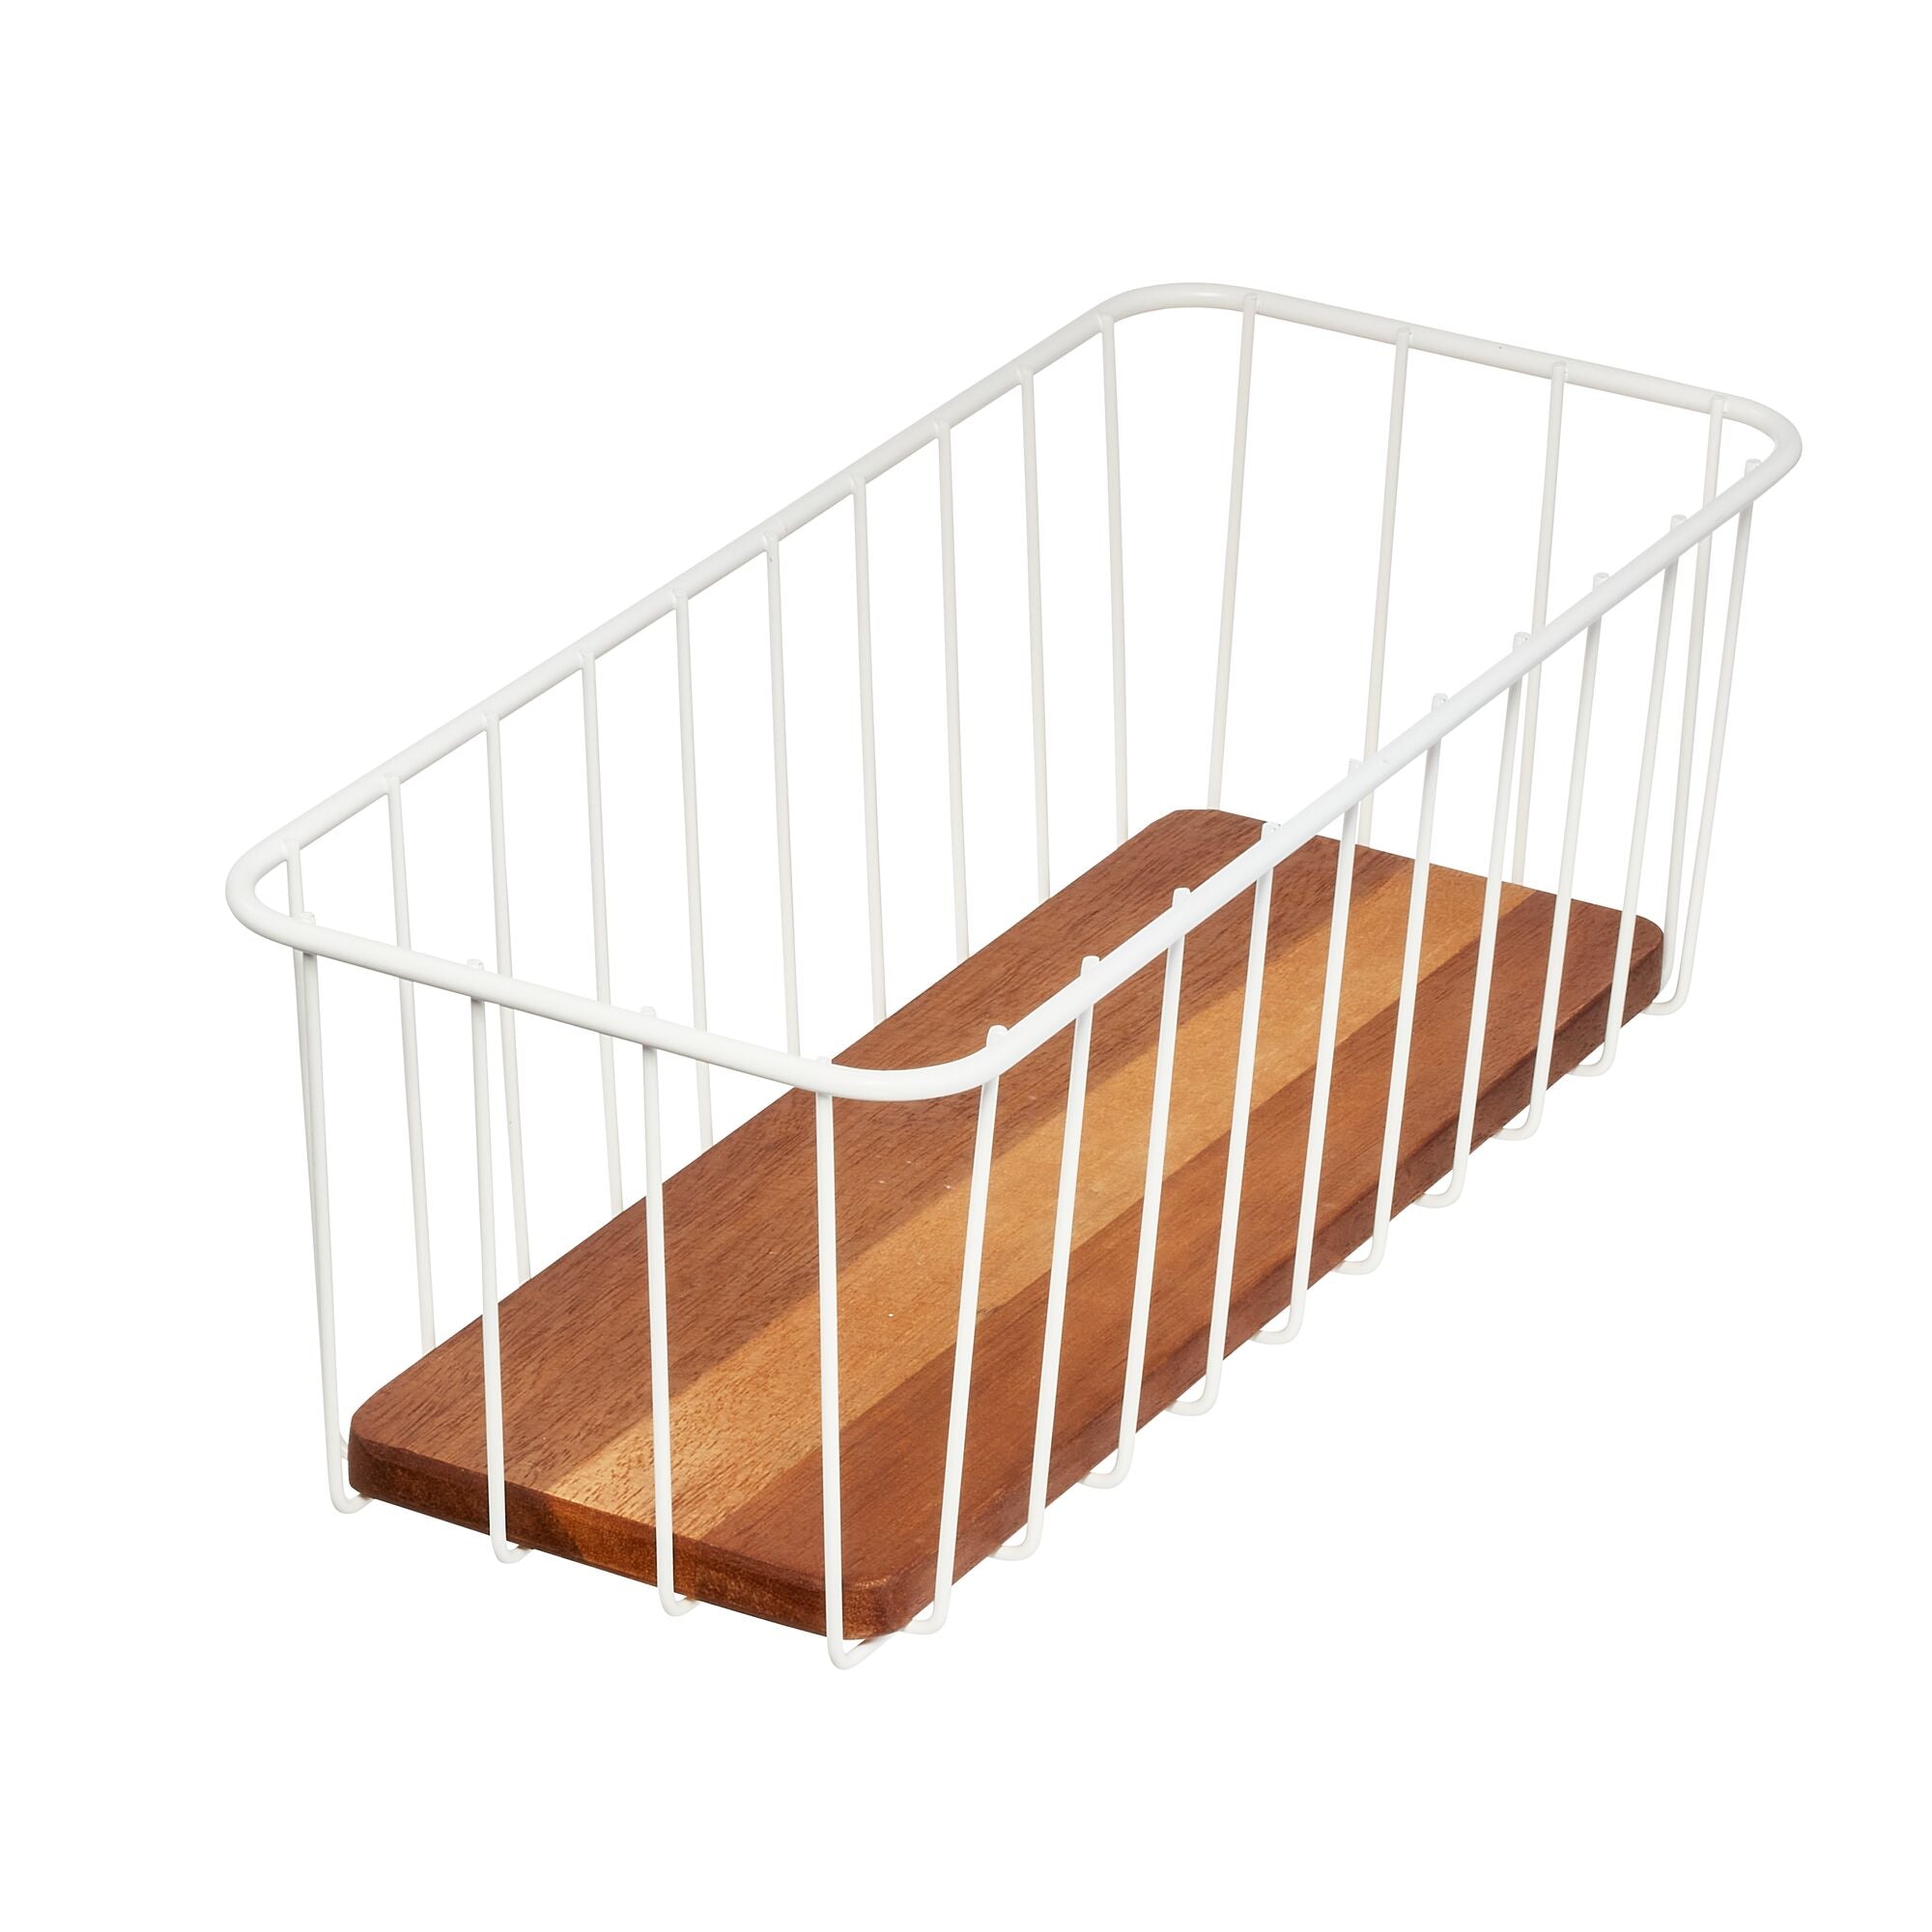 iDesign The RA Safford Collection Wire Basket with Acacia Wood, 10 x 8 x 5